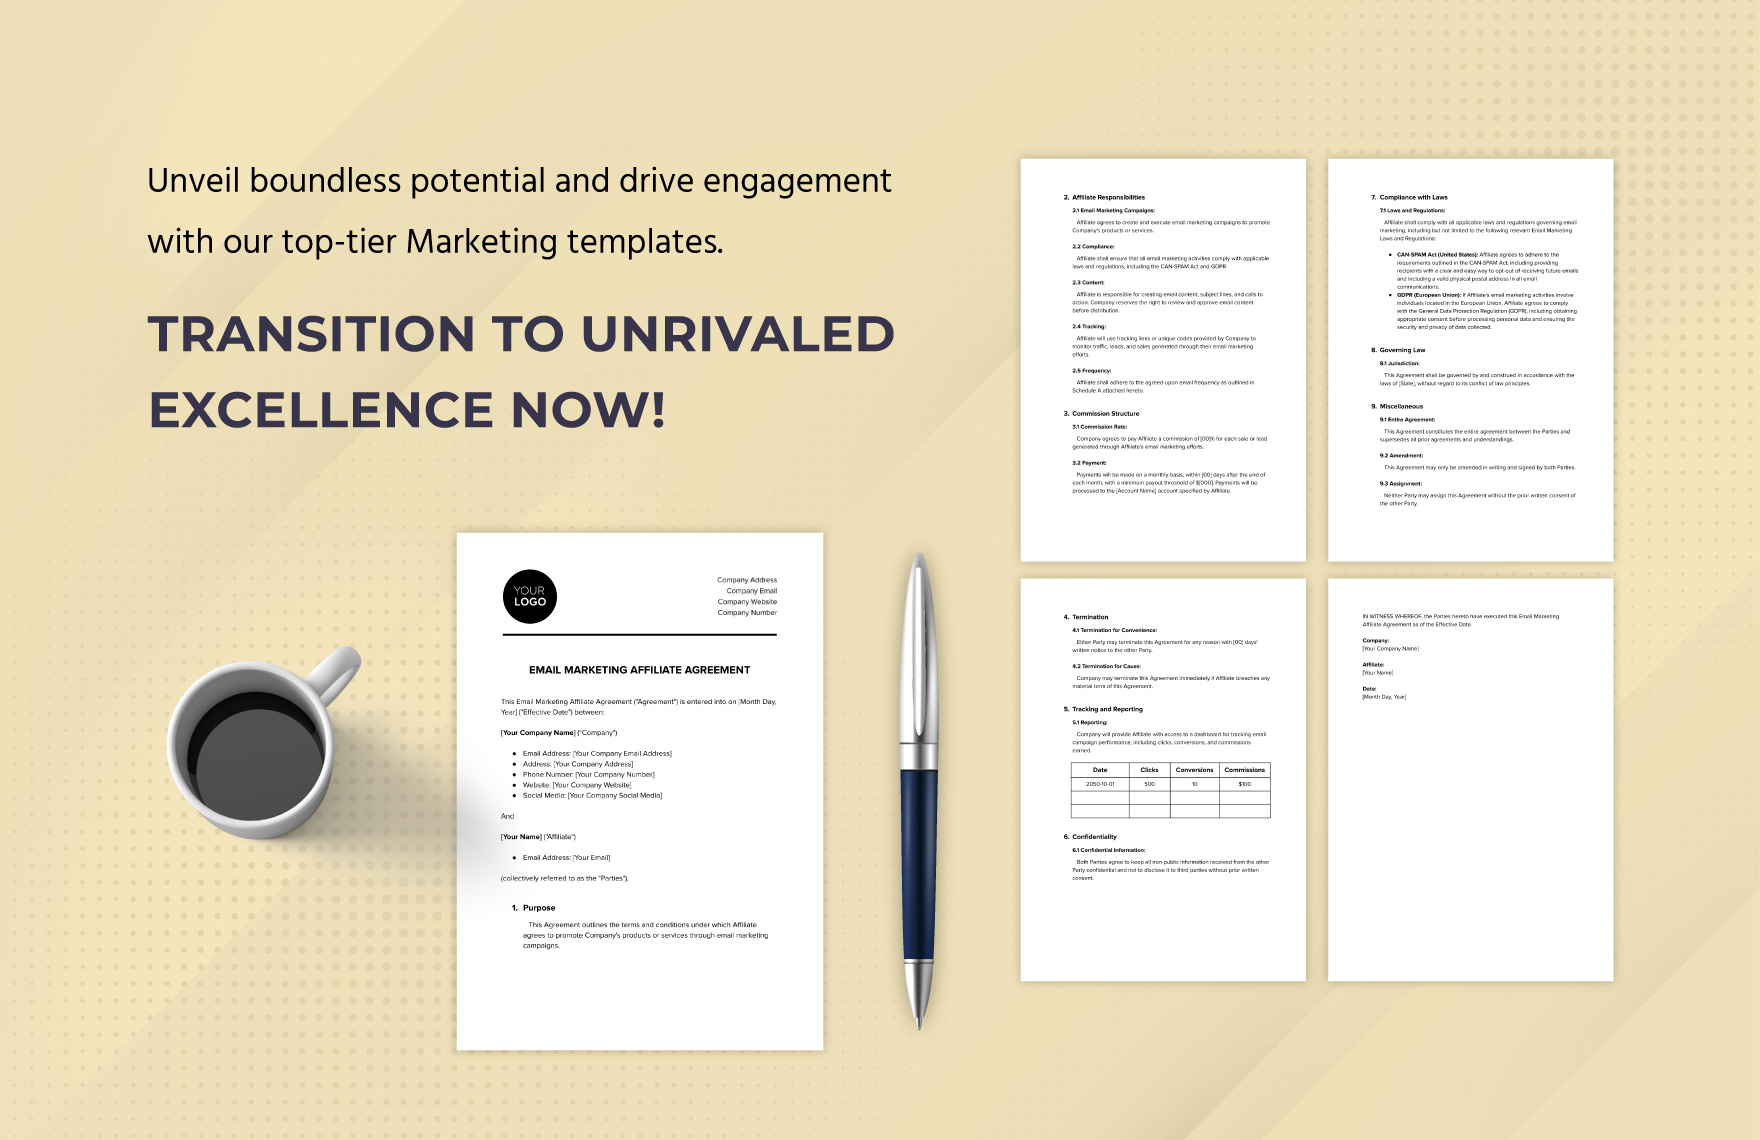 Email Marketing Affiliate Agreement Template